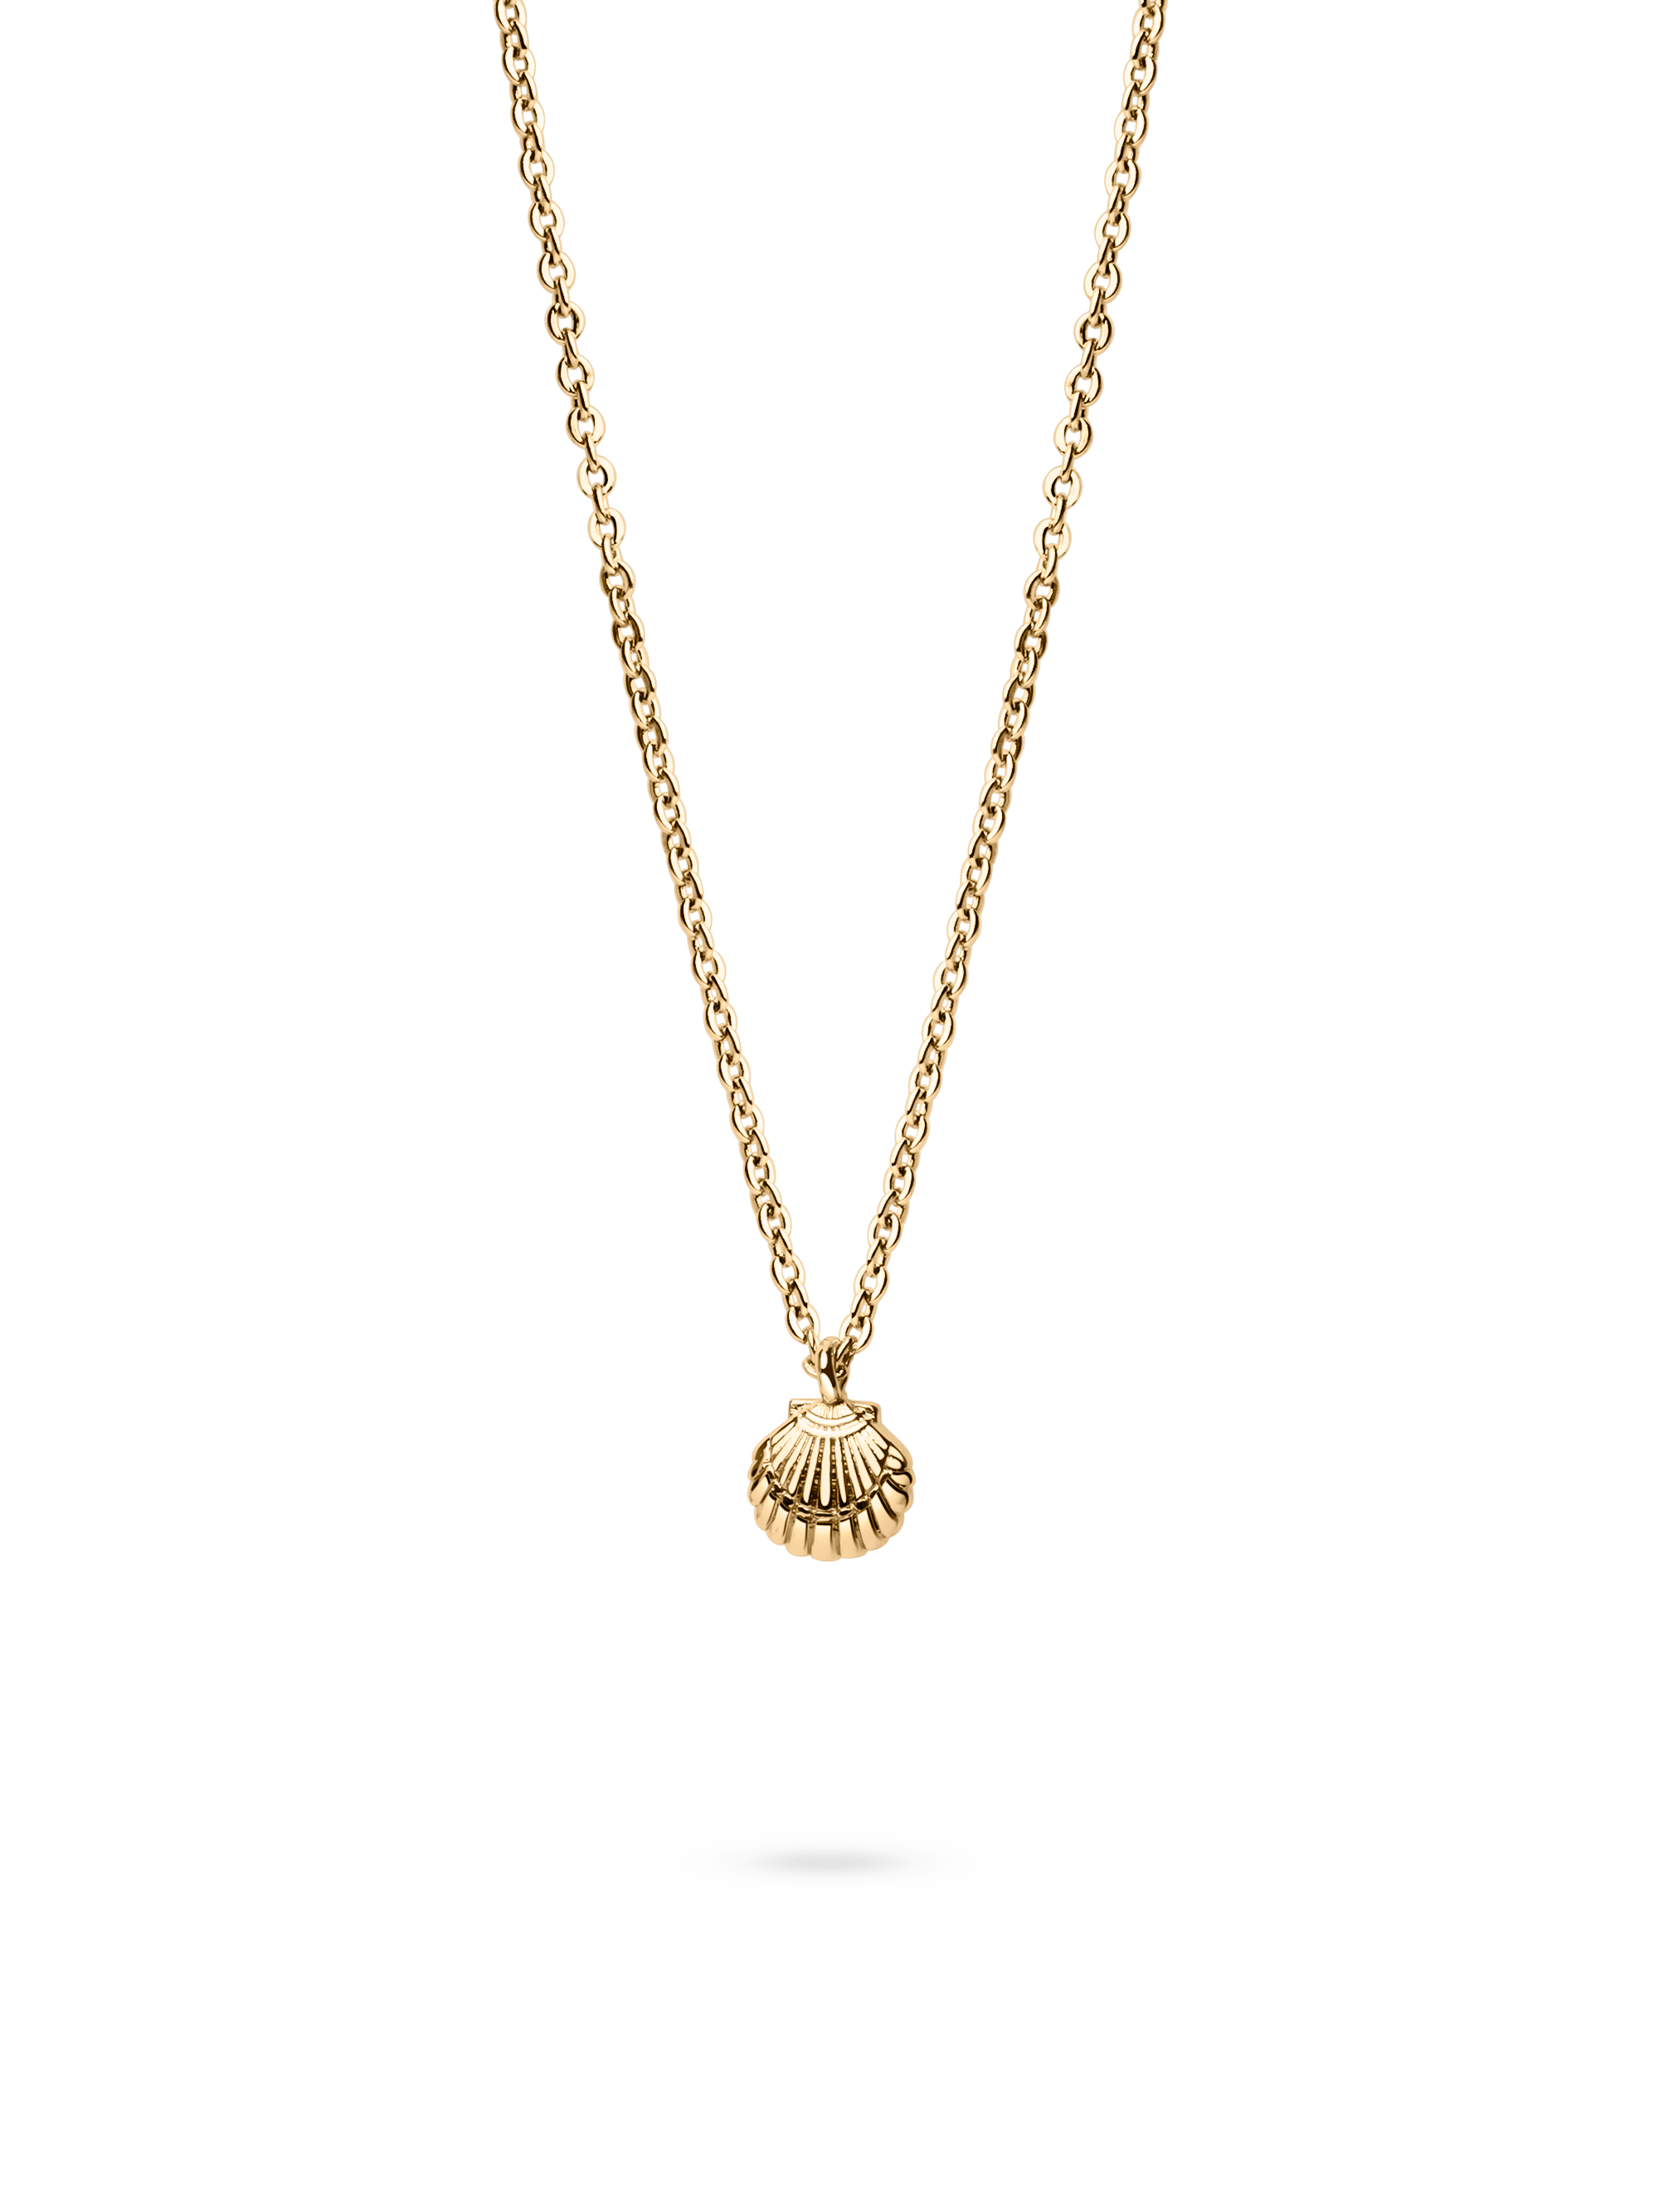 seashell necklace 18k gold plated brass